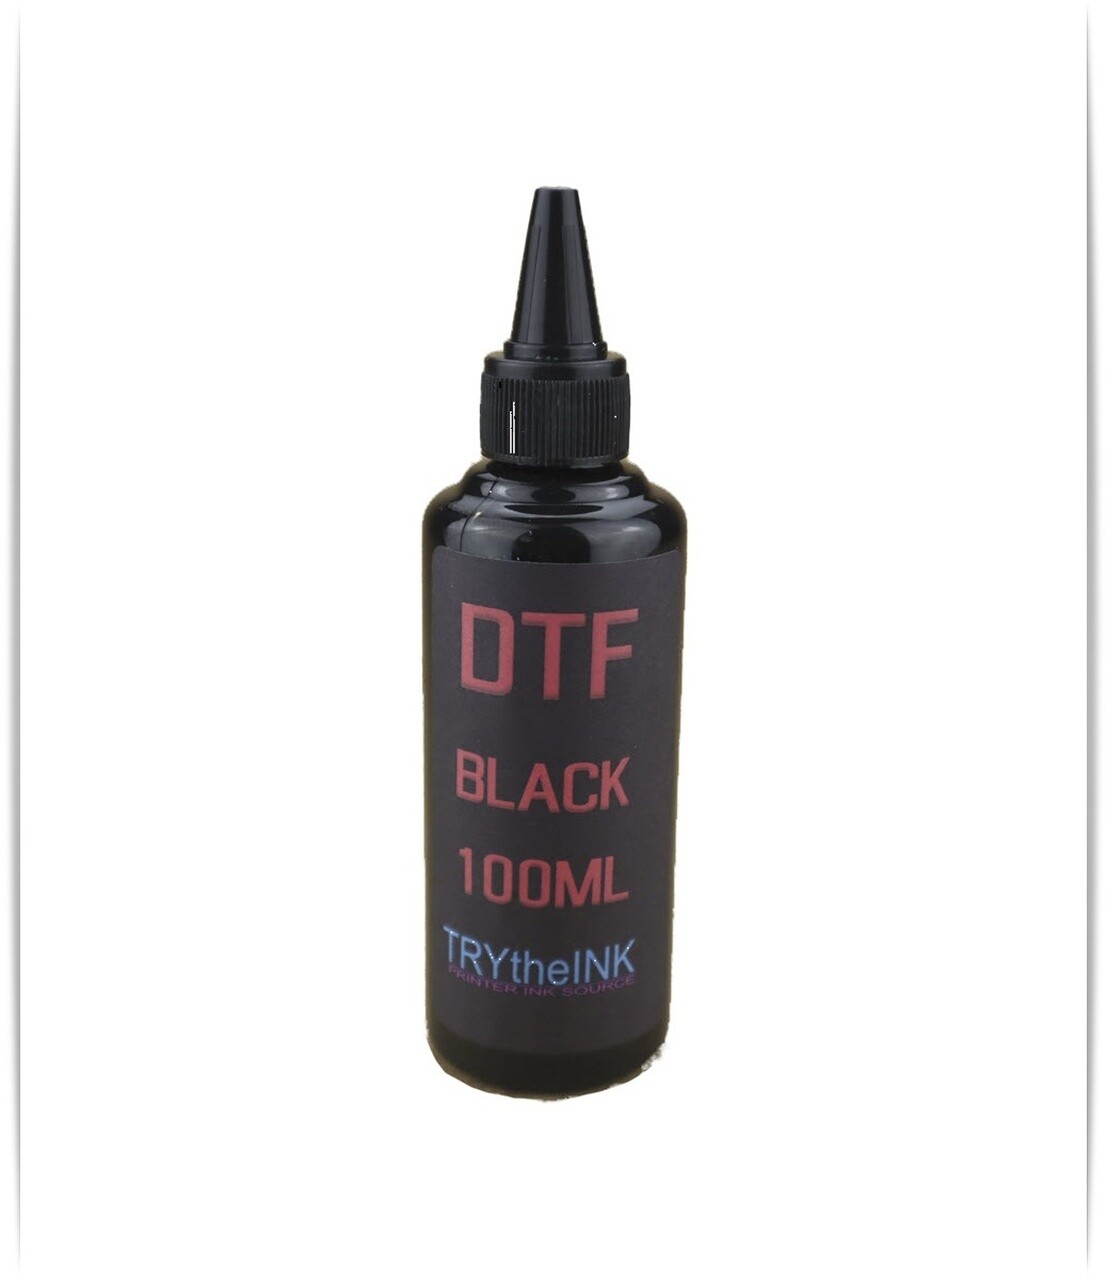 Black DTF Ink Direct To Film 100ml Bottle for Epson, Epson Print Head printers